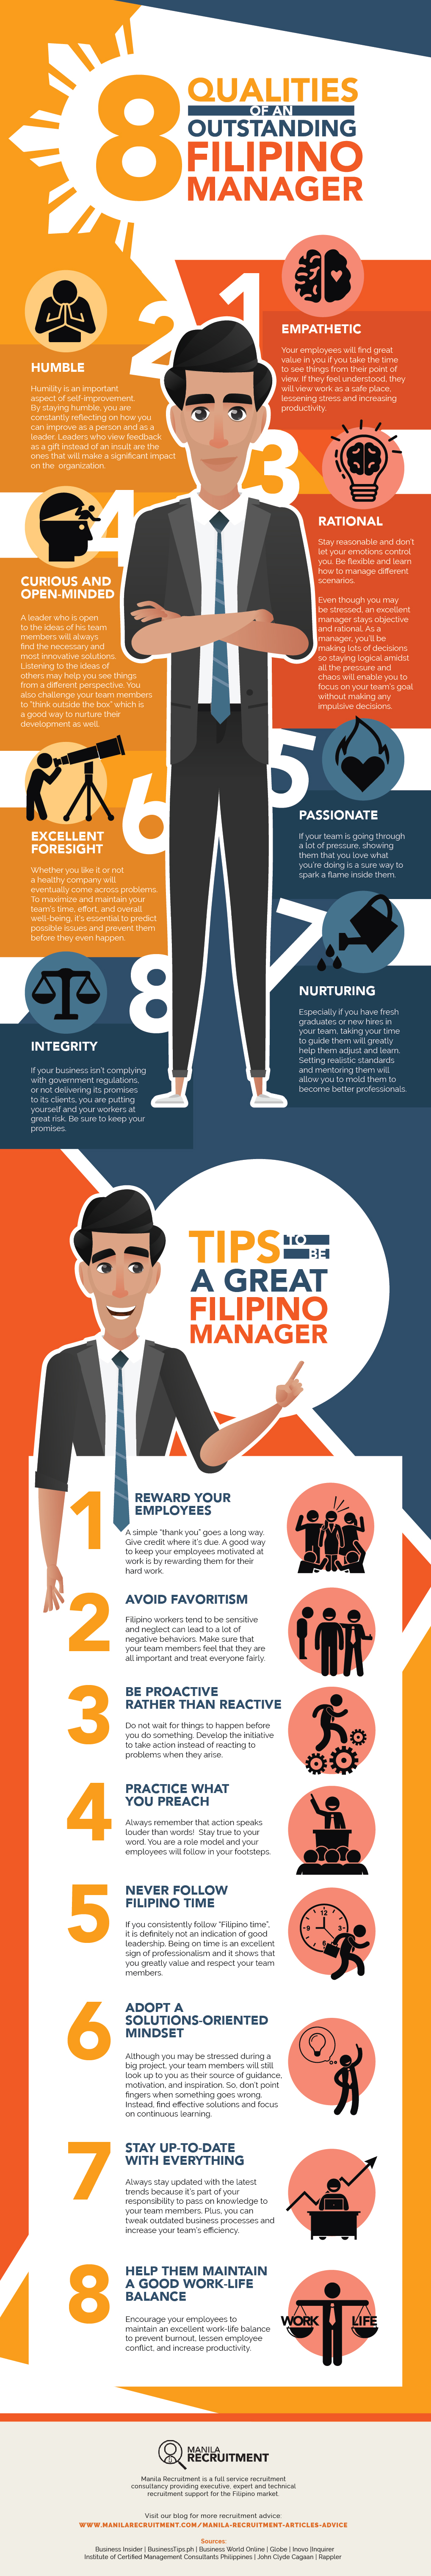 8 Qualities of an Outstanding Filipino Manager